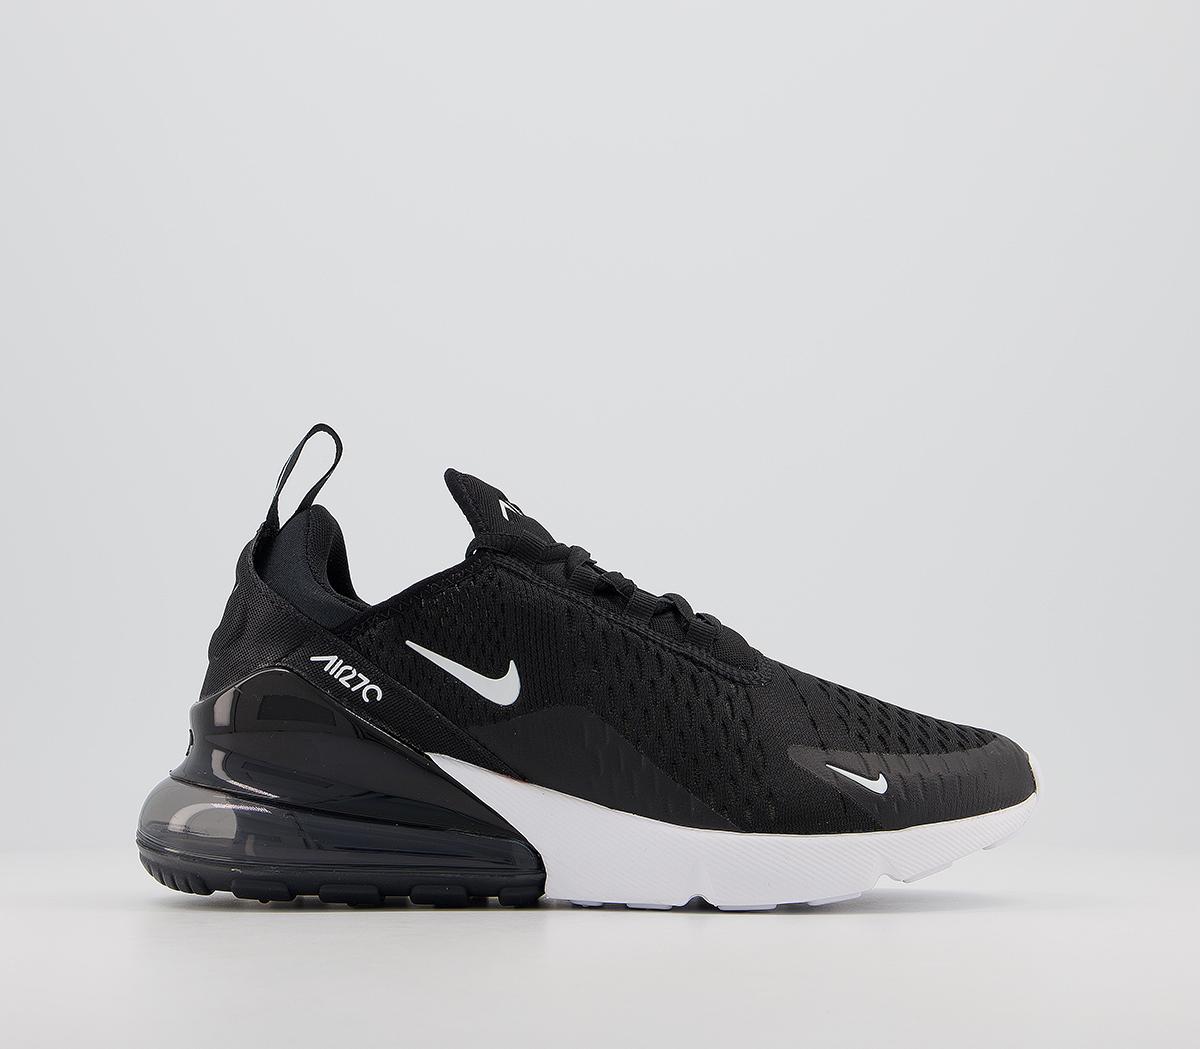 Nike Air Max 270 Black Anthracite White F - His trainers